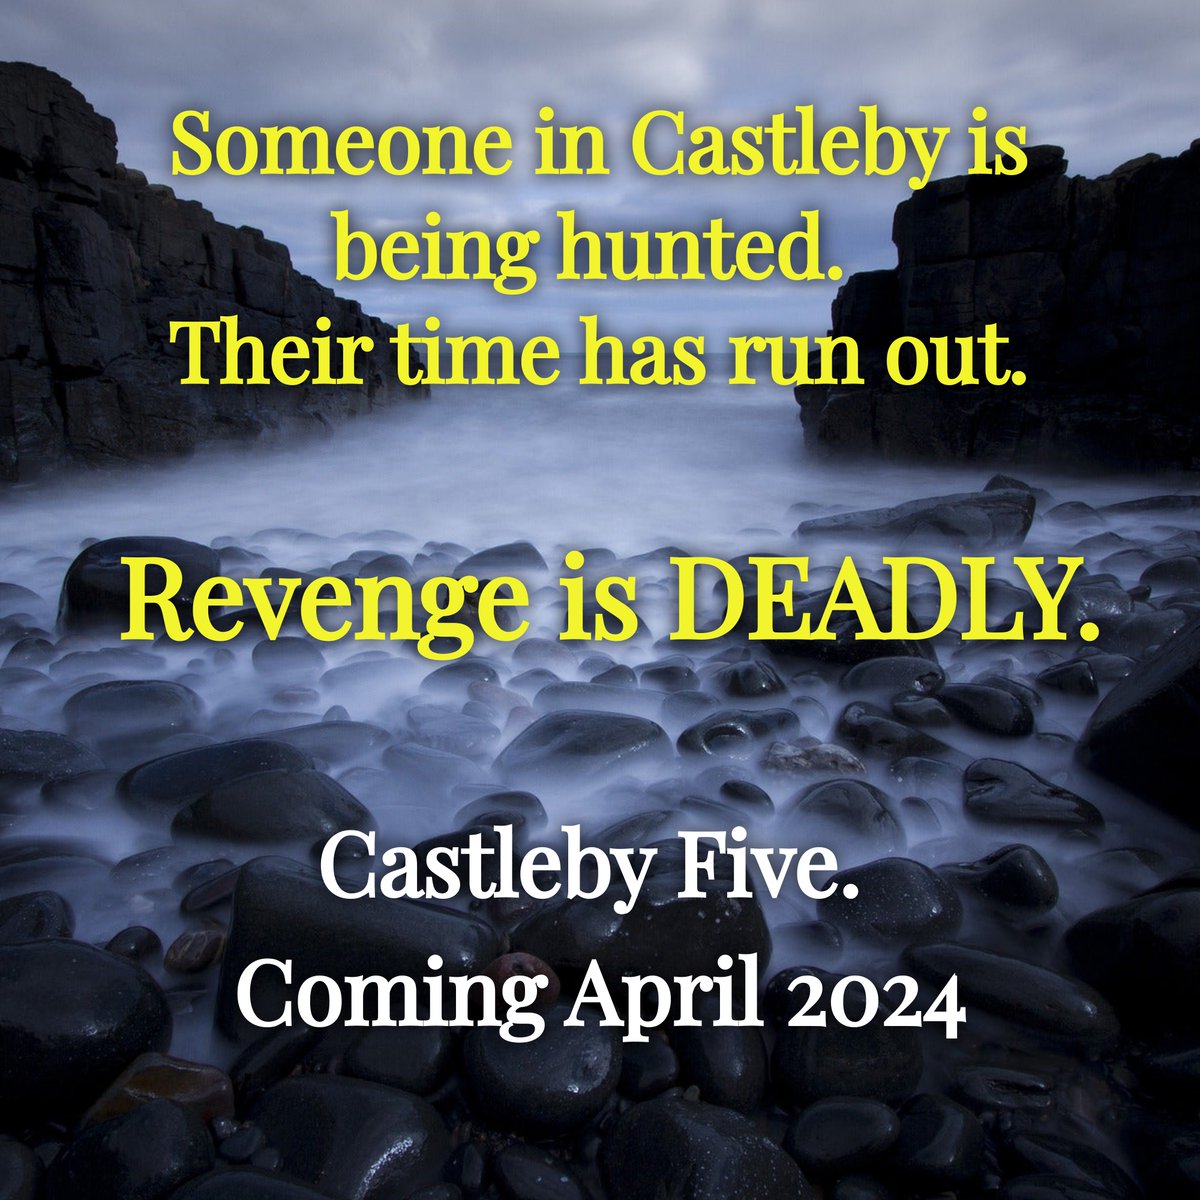 April 2024.  It's on the way.  Name and cover reveal soon!
#writingcommunity #BooksWorthReading #crimefiction #suspensethriller #crime #suspensestories #thriller #suspenseseries  #crimethrillerseries #seriessuspense #crimethriller #tenby #booktwitter #castleby